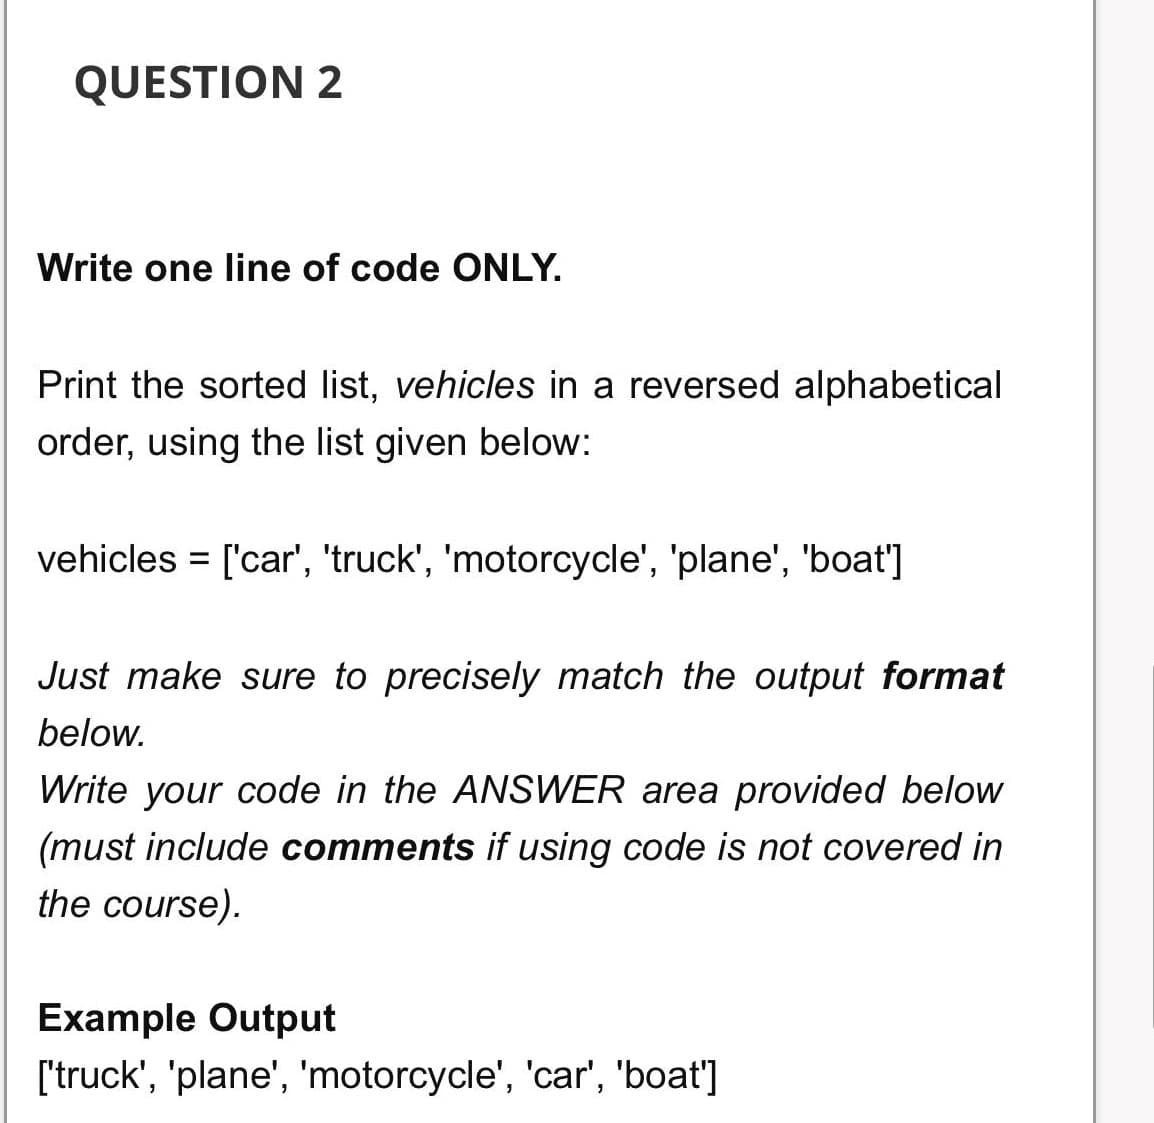 QUESTION 2
Write one line of code ONLY.
Print the sorted list, vehicles in a reversed alphabetical
order, using the list given below:
vehicles = ['car', 'truck', 'motorcycle', 'plane', 'boat']
%3D
Just make sure to precisely match the output format
below.
Write your code in the ANSWER area provided below
(must include comments if using code is not covered in
the course).
Example Output
['truck', 'plane', 'motorcycle', 'car', 'boat']
